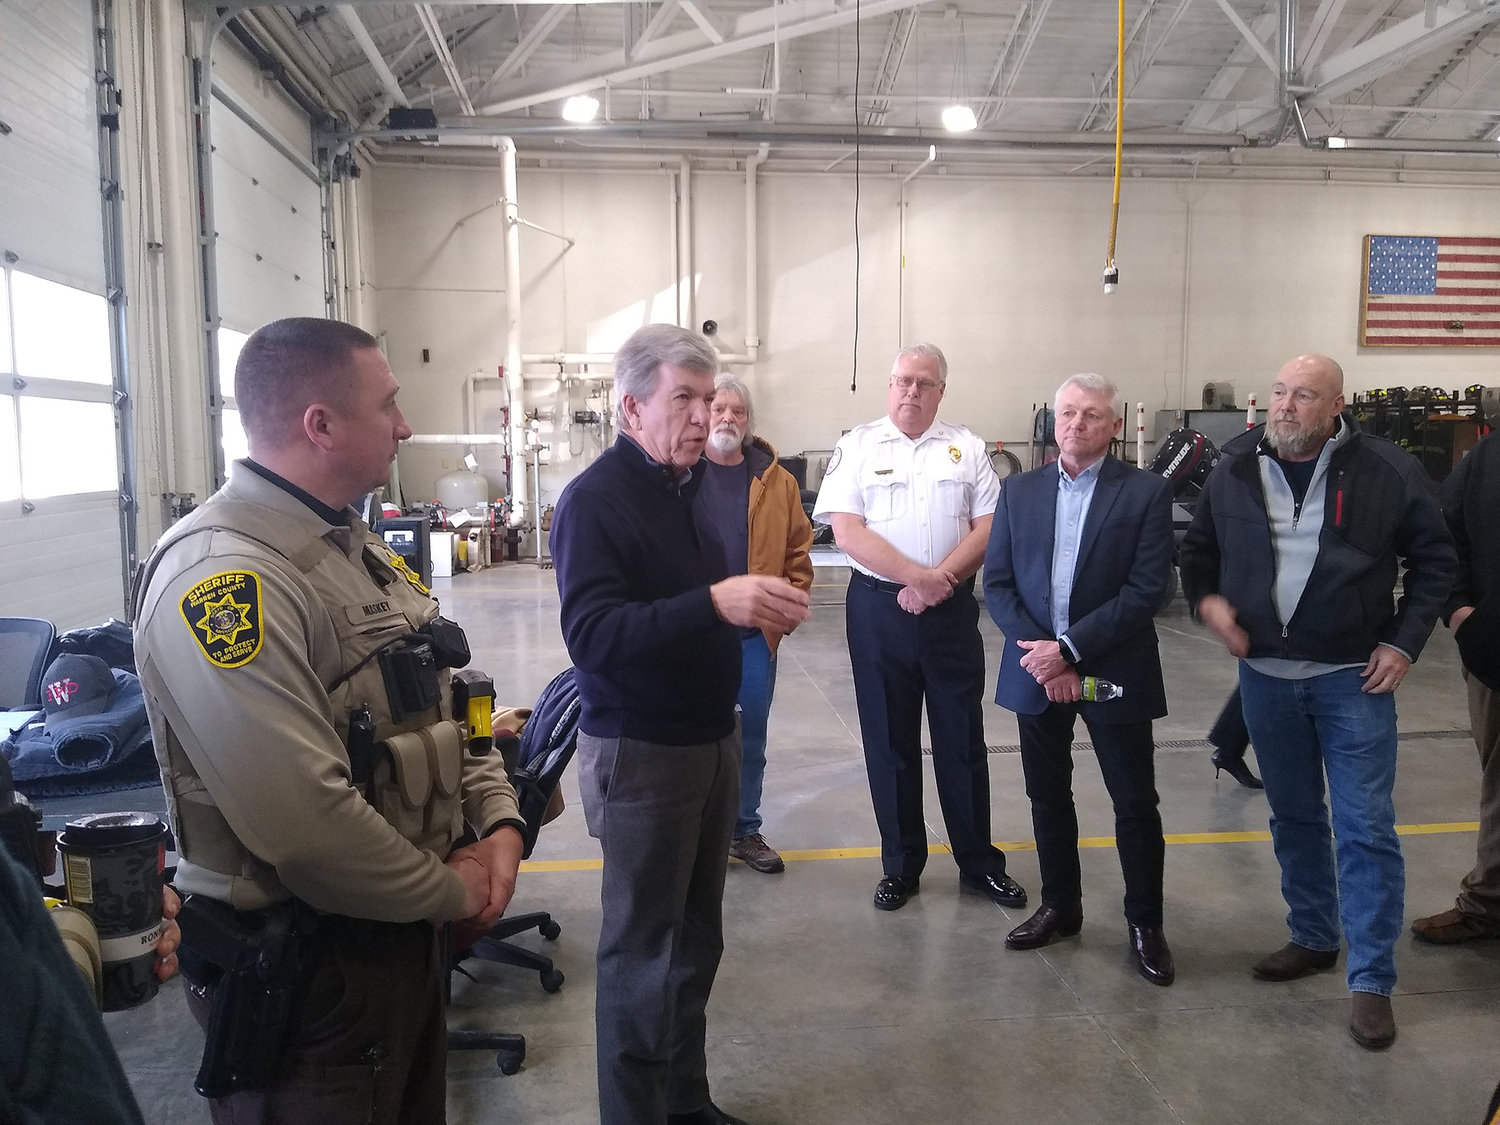 SENATOR VISITS — U.S. Senator Roy Blunt addresses a group of first responders, emergency board members and city leaders during a weekend visit to the Warrenton Fire District station on South Highway 47. Blunt came to Warrenton as part of two stops that he made on Saturday, Feb. 12.